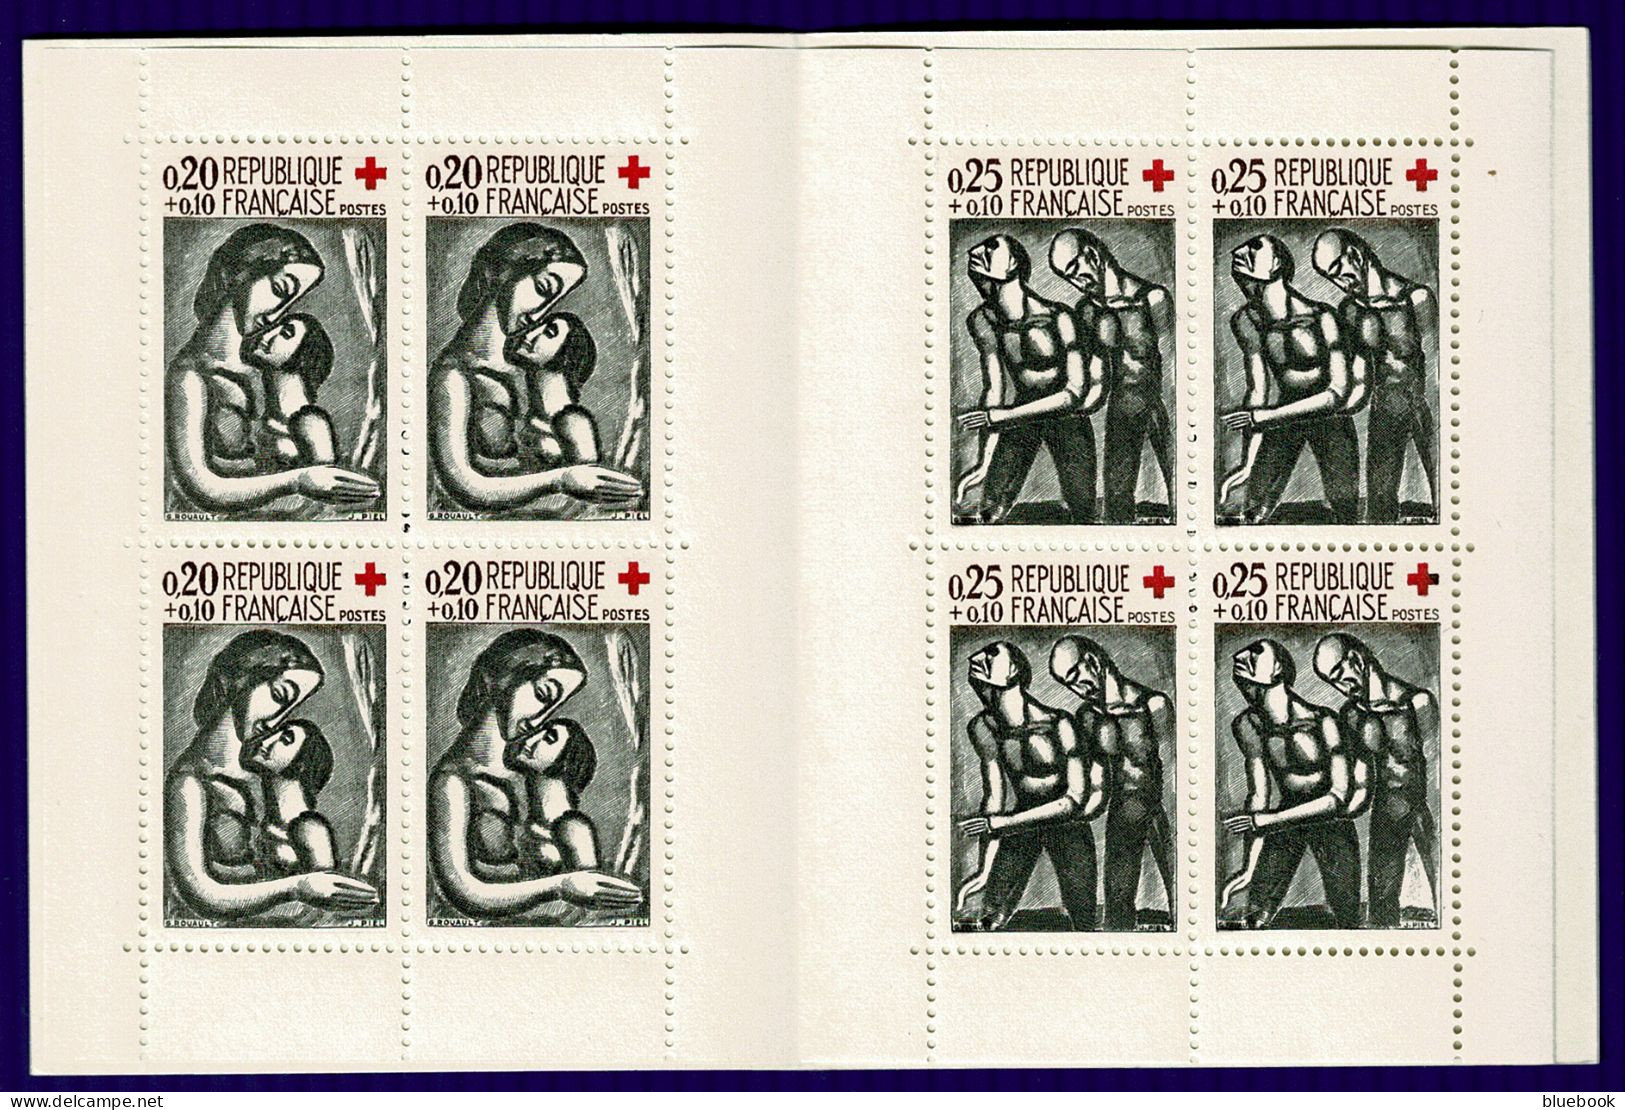 Ref 1645 - France 1961 - Red Cross Booklet SG 1555/1556 - Croce Rossa